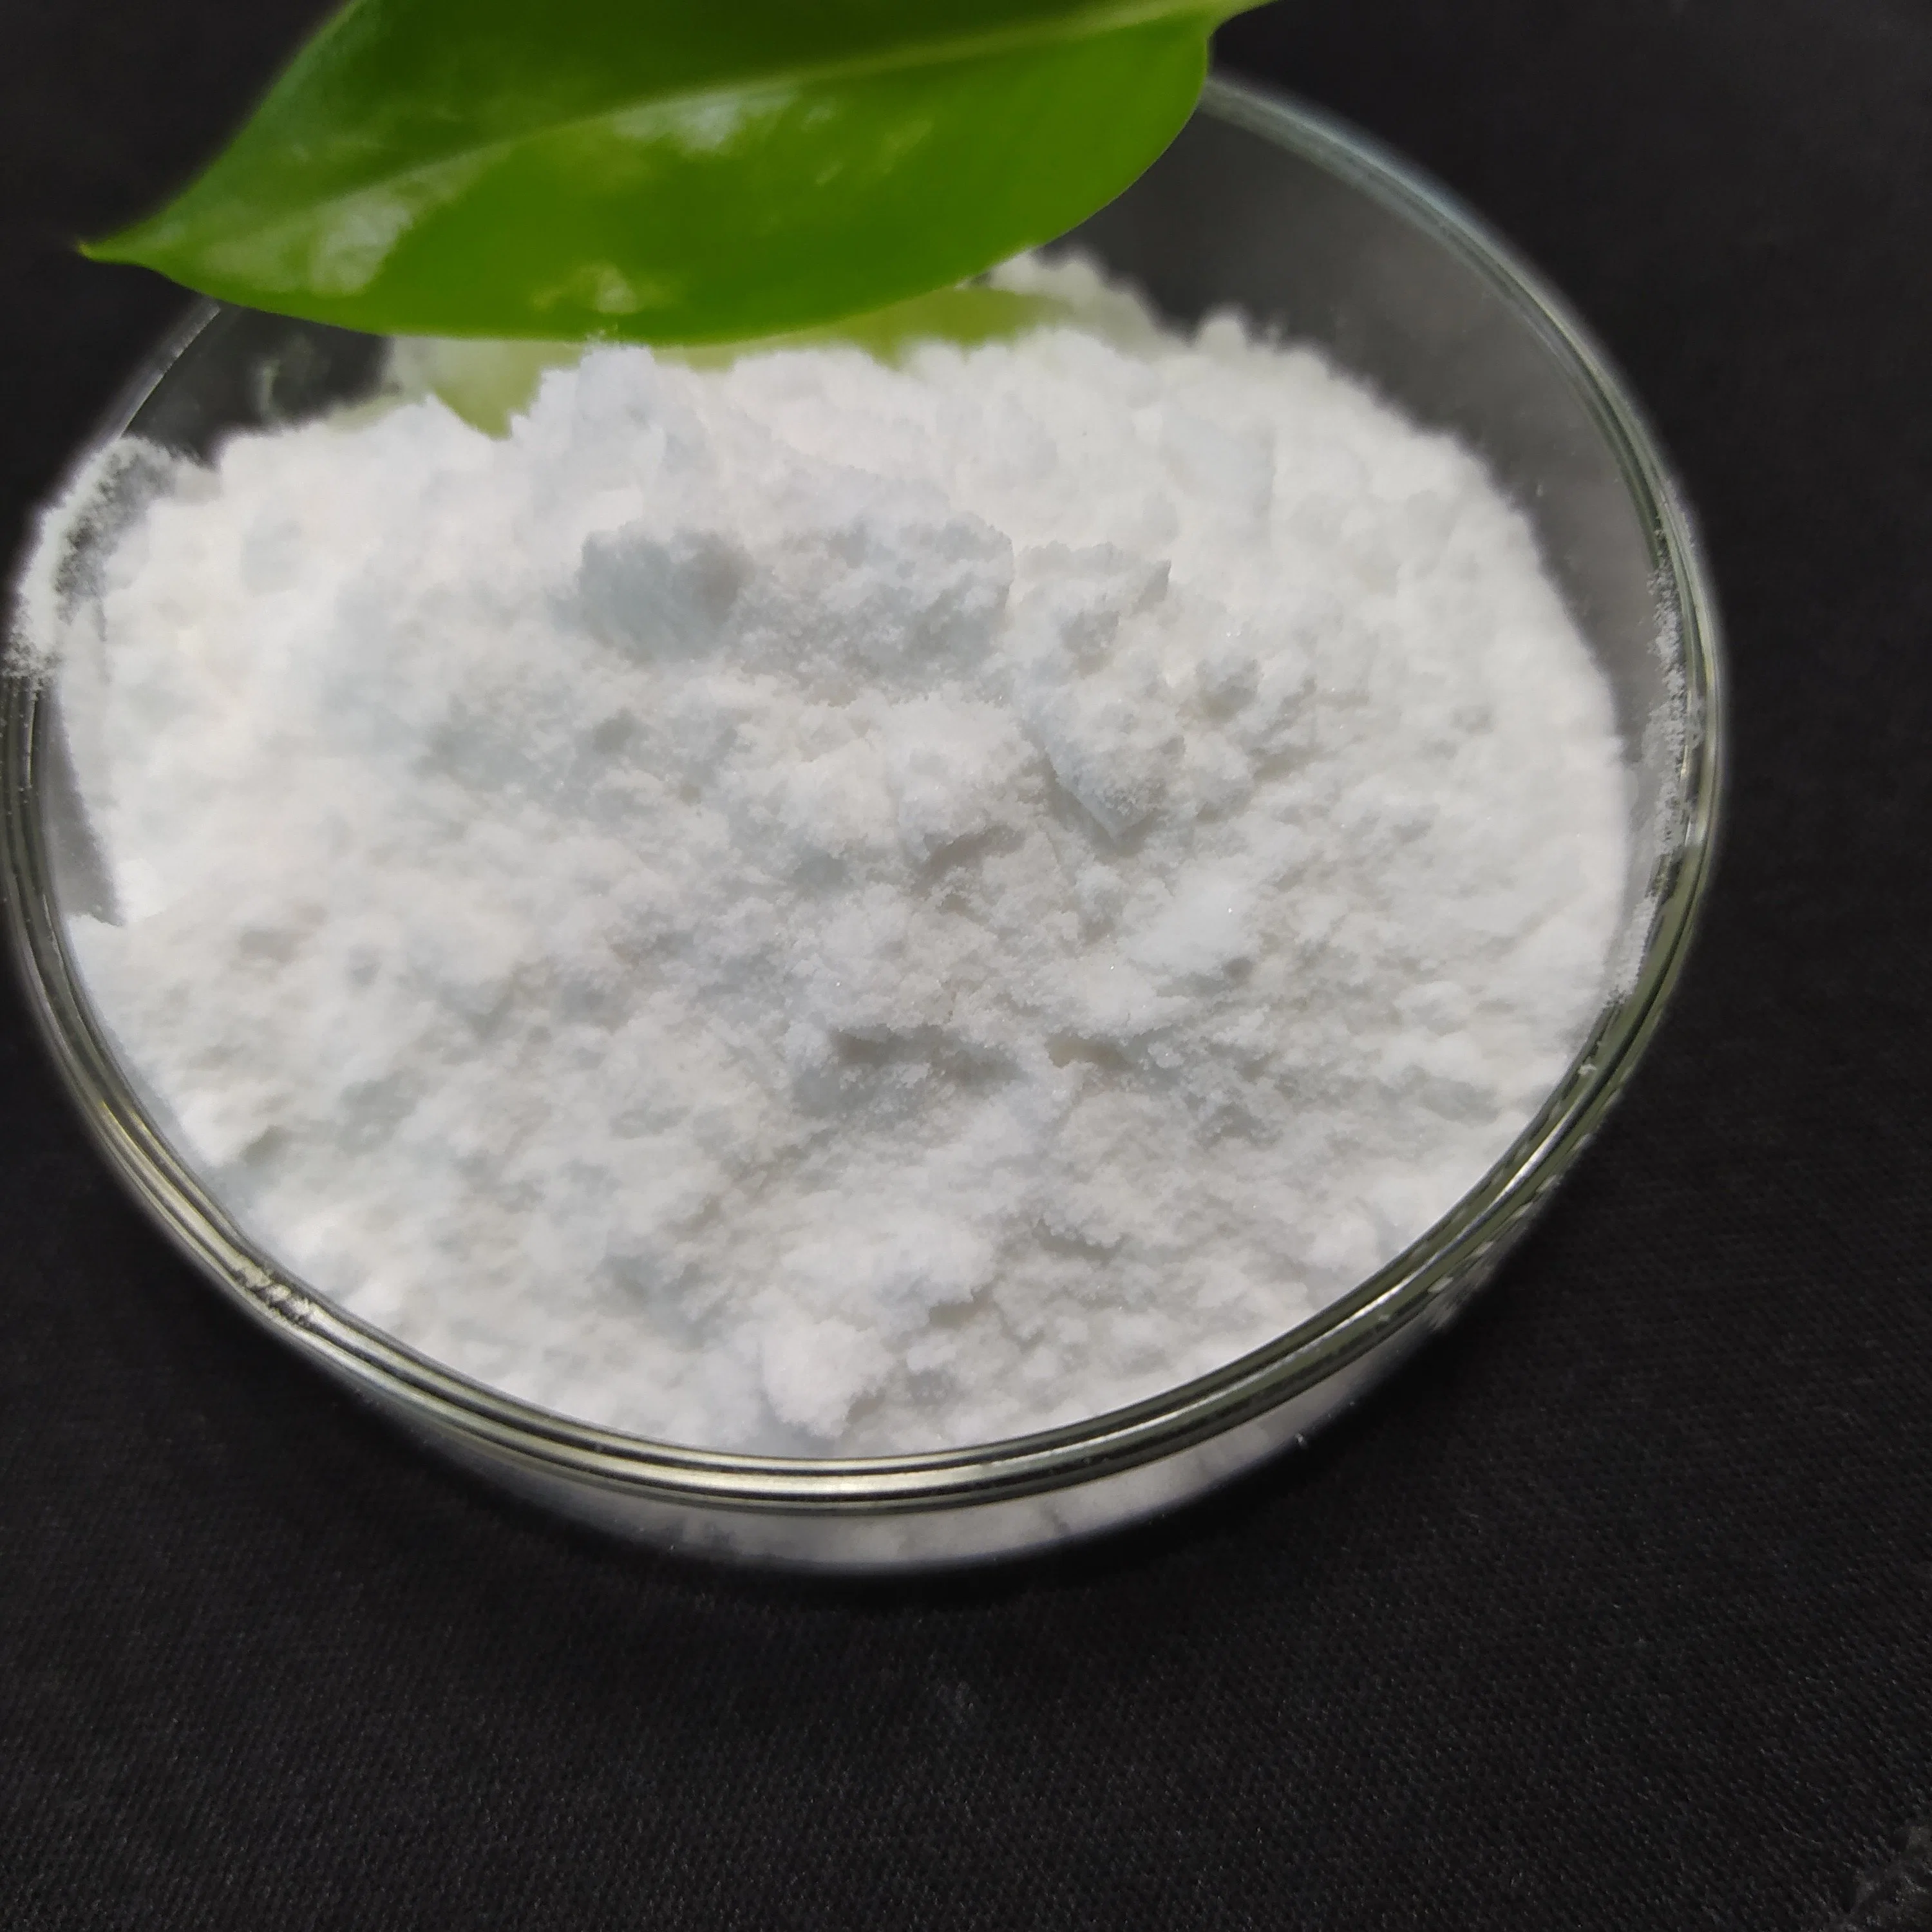 Melamine Manufacturing Factory CAS 108-78-1 with Purity 99.8%, Melamine Powder Price